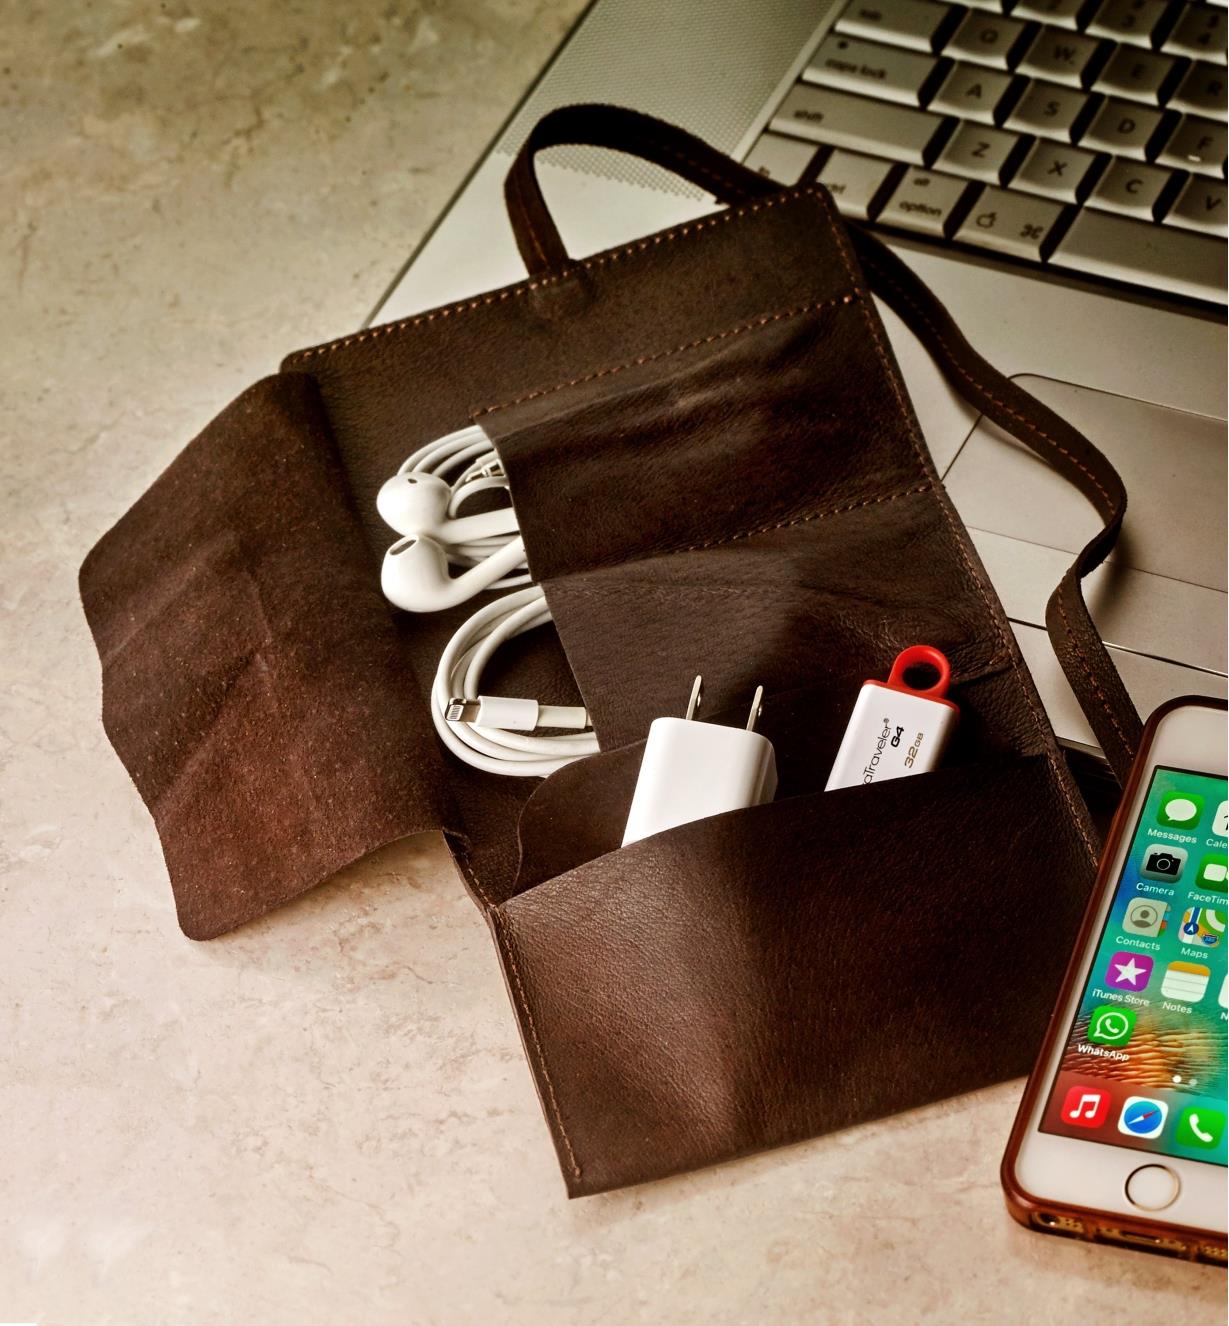 A cord wallet beside a laptop and smartphone, holding a charge cable, ear buds and a flash drive